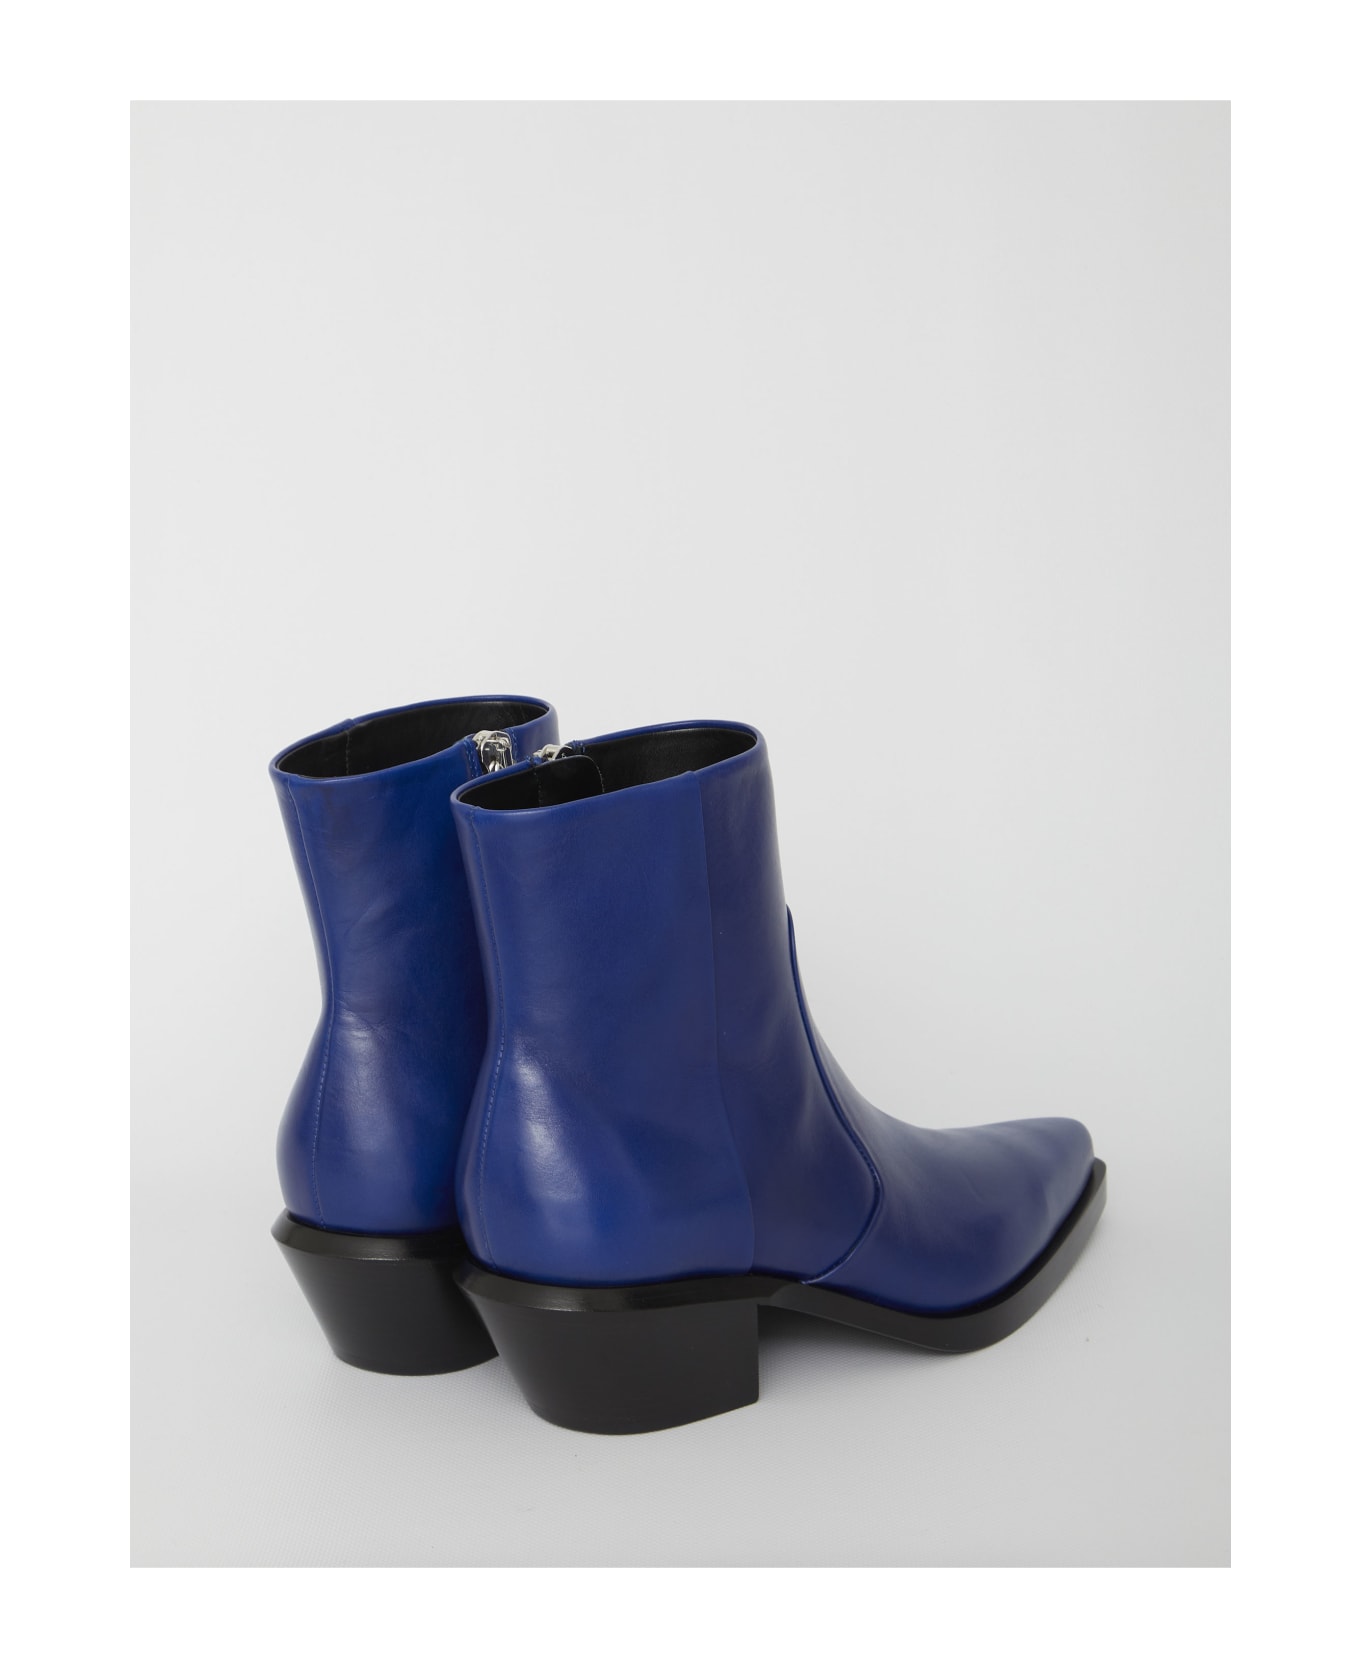 Off-White Slim Texan Ankle Boots - BLUE ブーツ